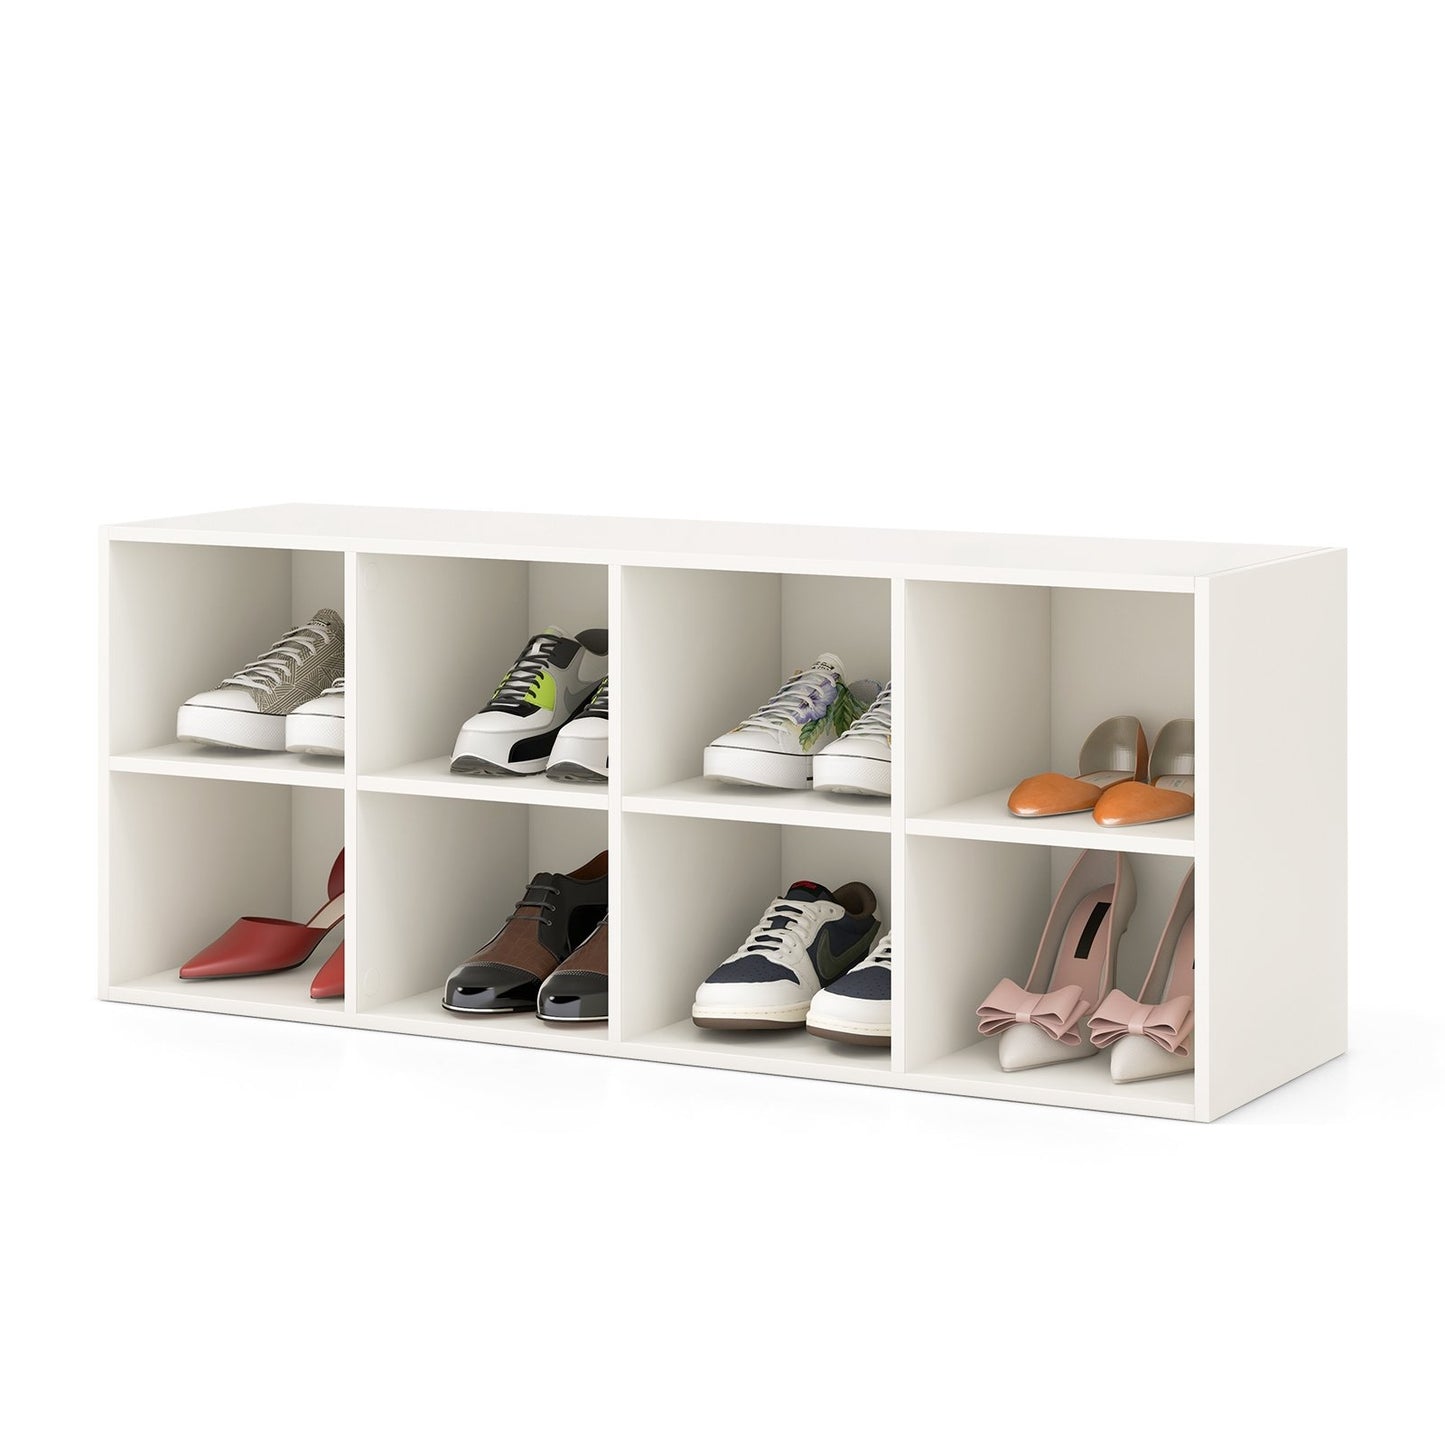 8 Cubbies Shoe Organizer with 500 LBS Weight Capacity, White